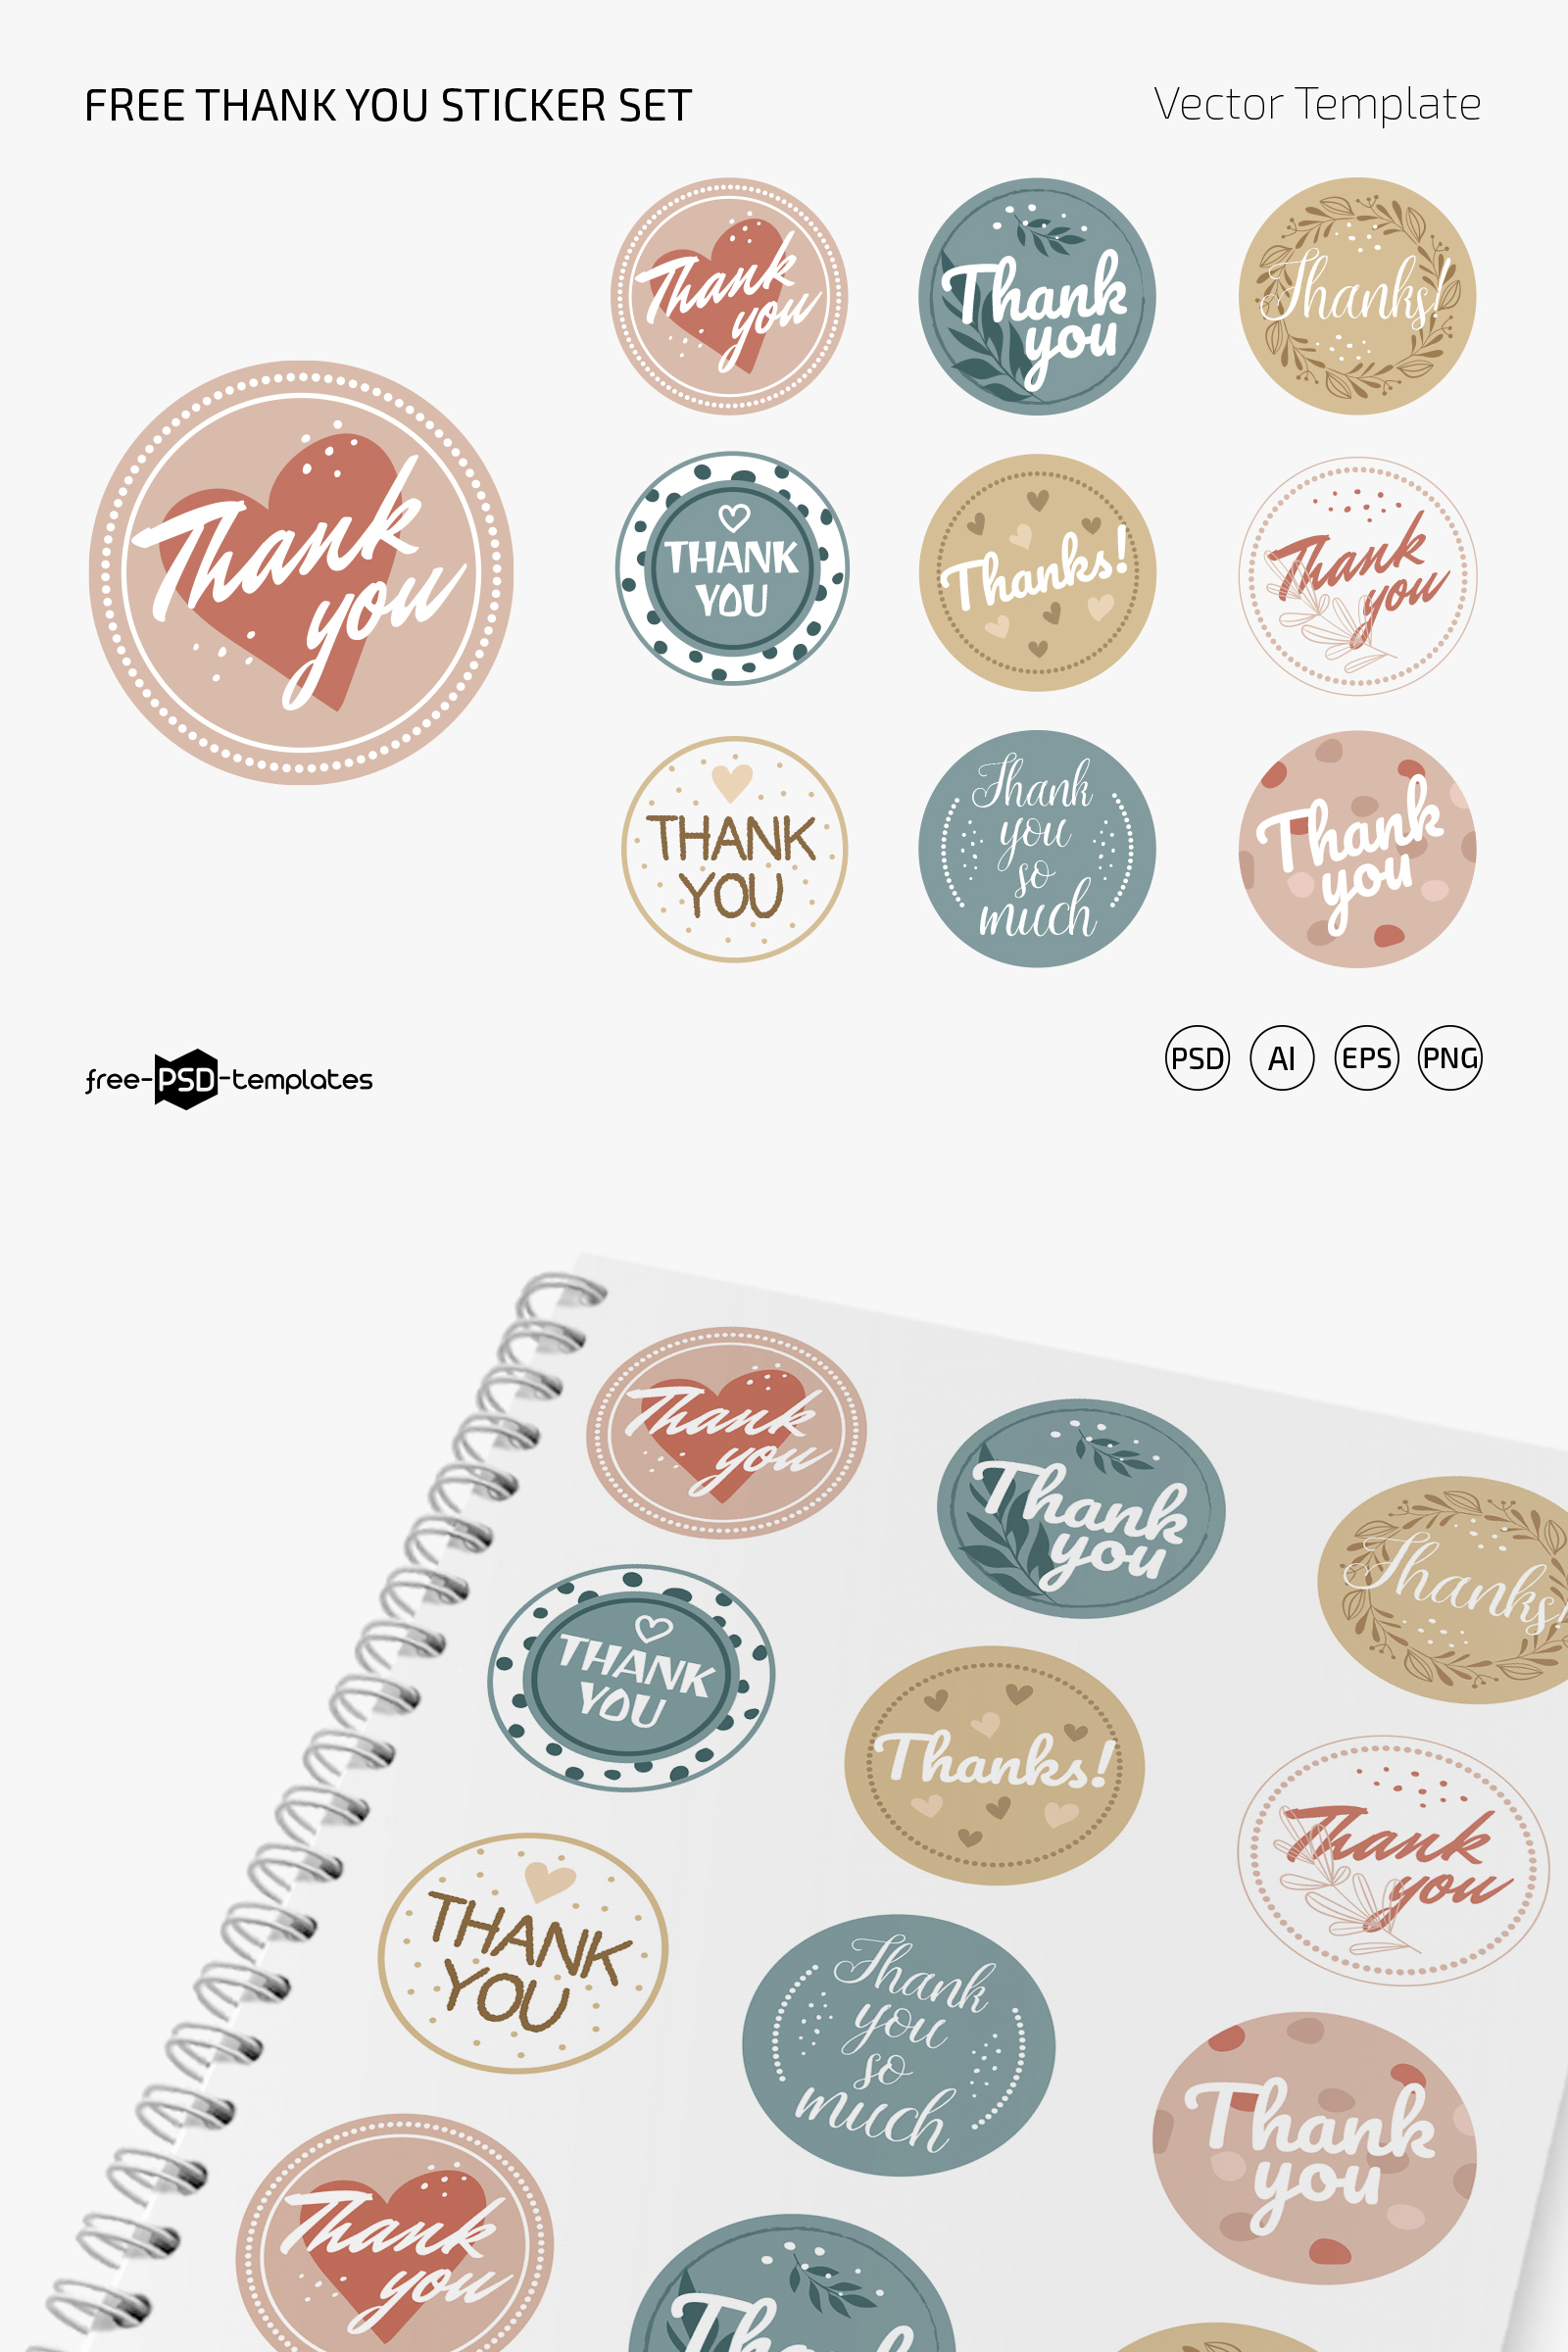 free-thank-you-sticker-template-psd-ai-eps-png